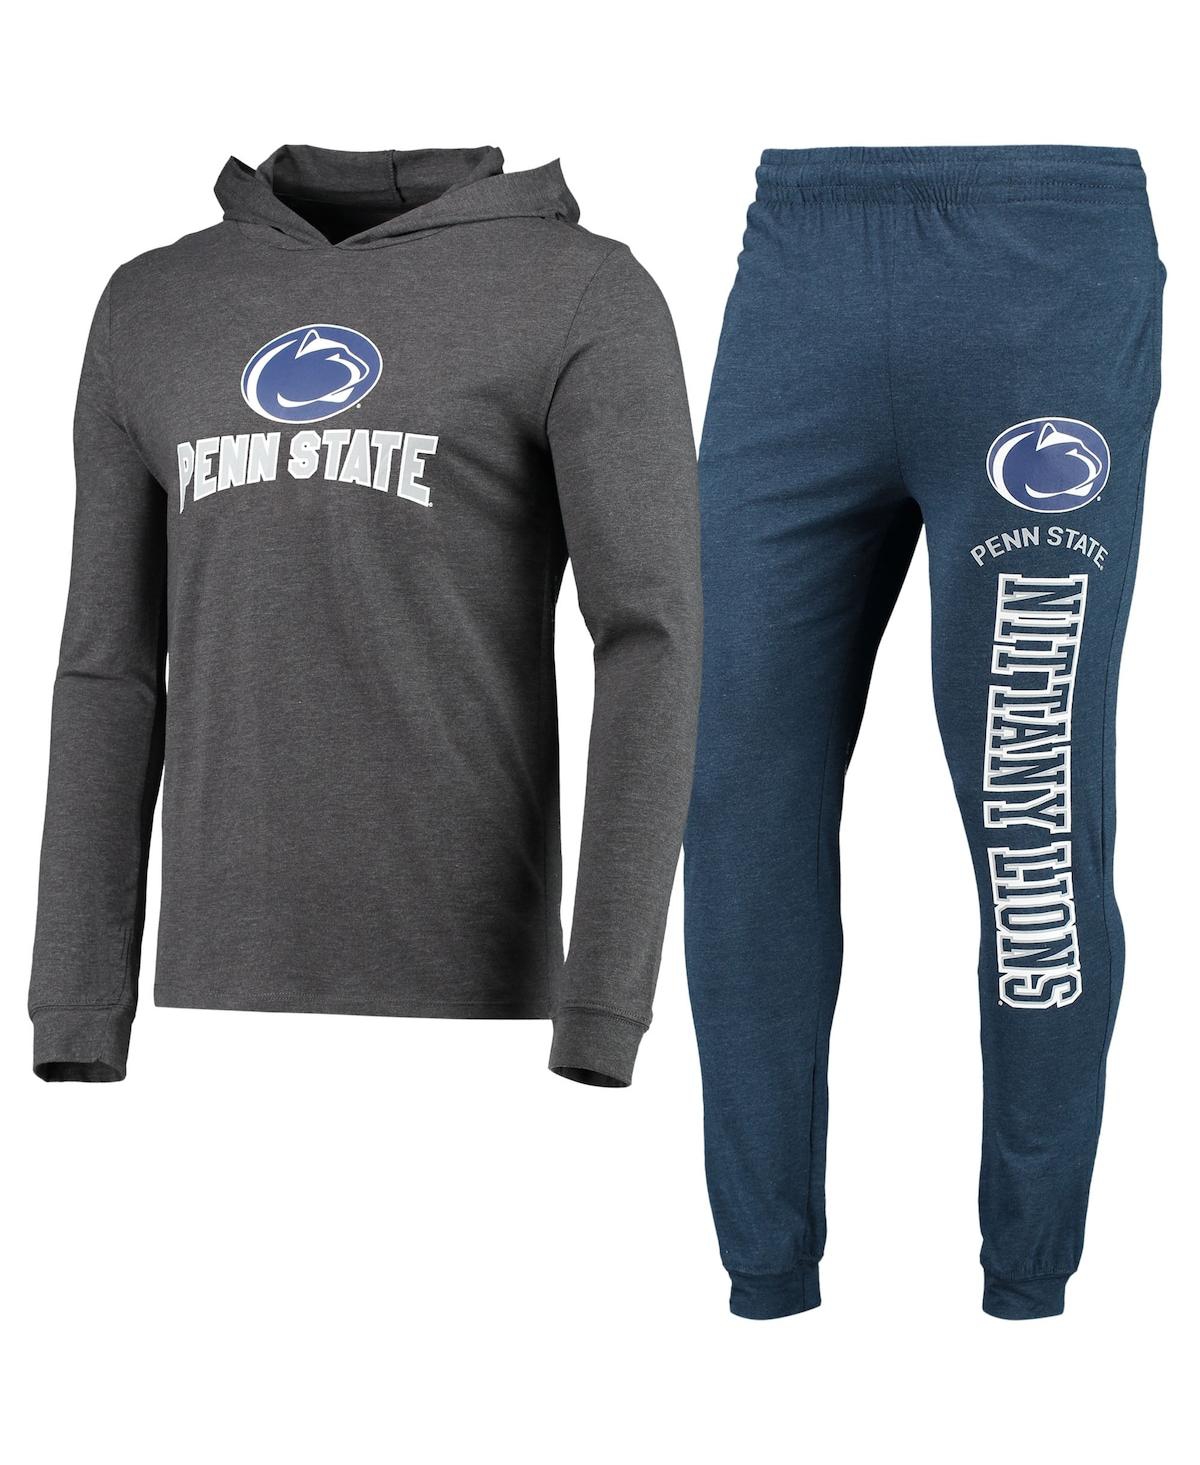 Men's Concepts Sport Heathered Navy, Heathered Charcoal Penn State Nittany Lions Meter Long Sleeve Hoodie T-shirt and Jogger Pants Set - Navy, Heather